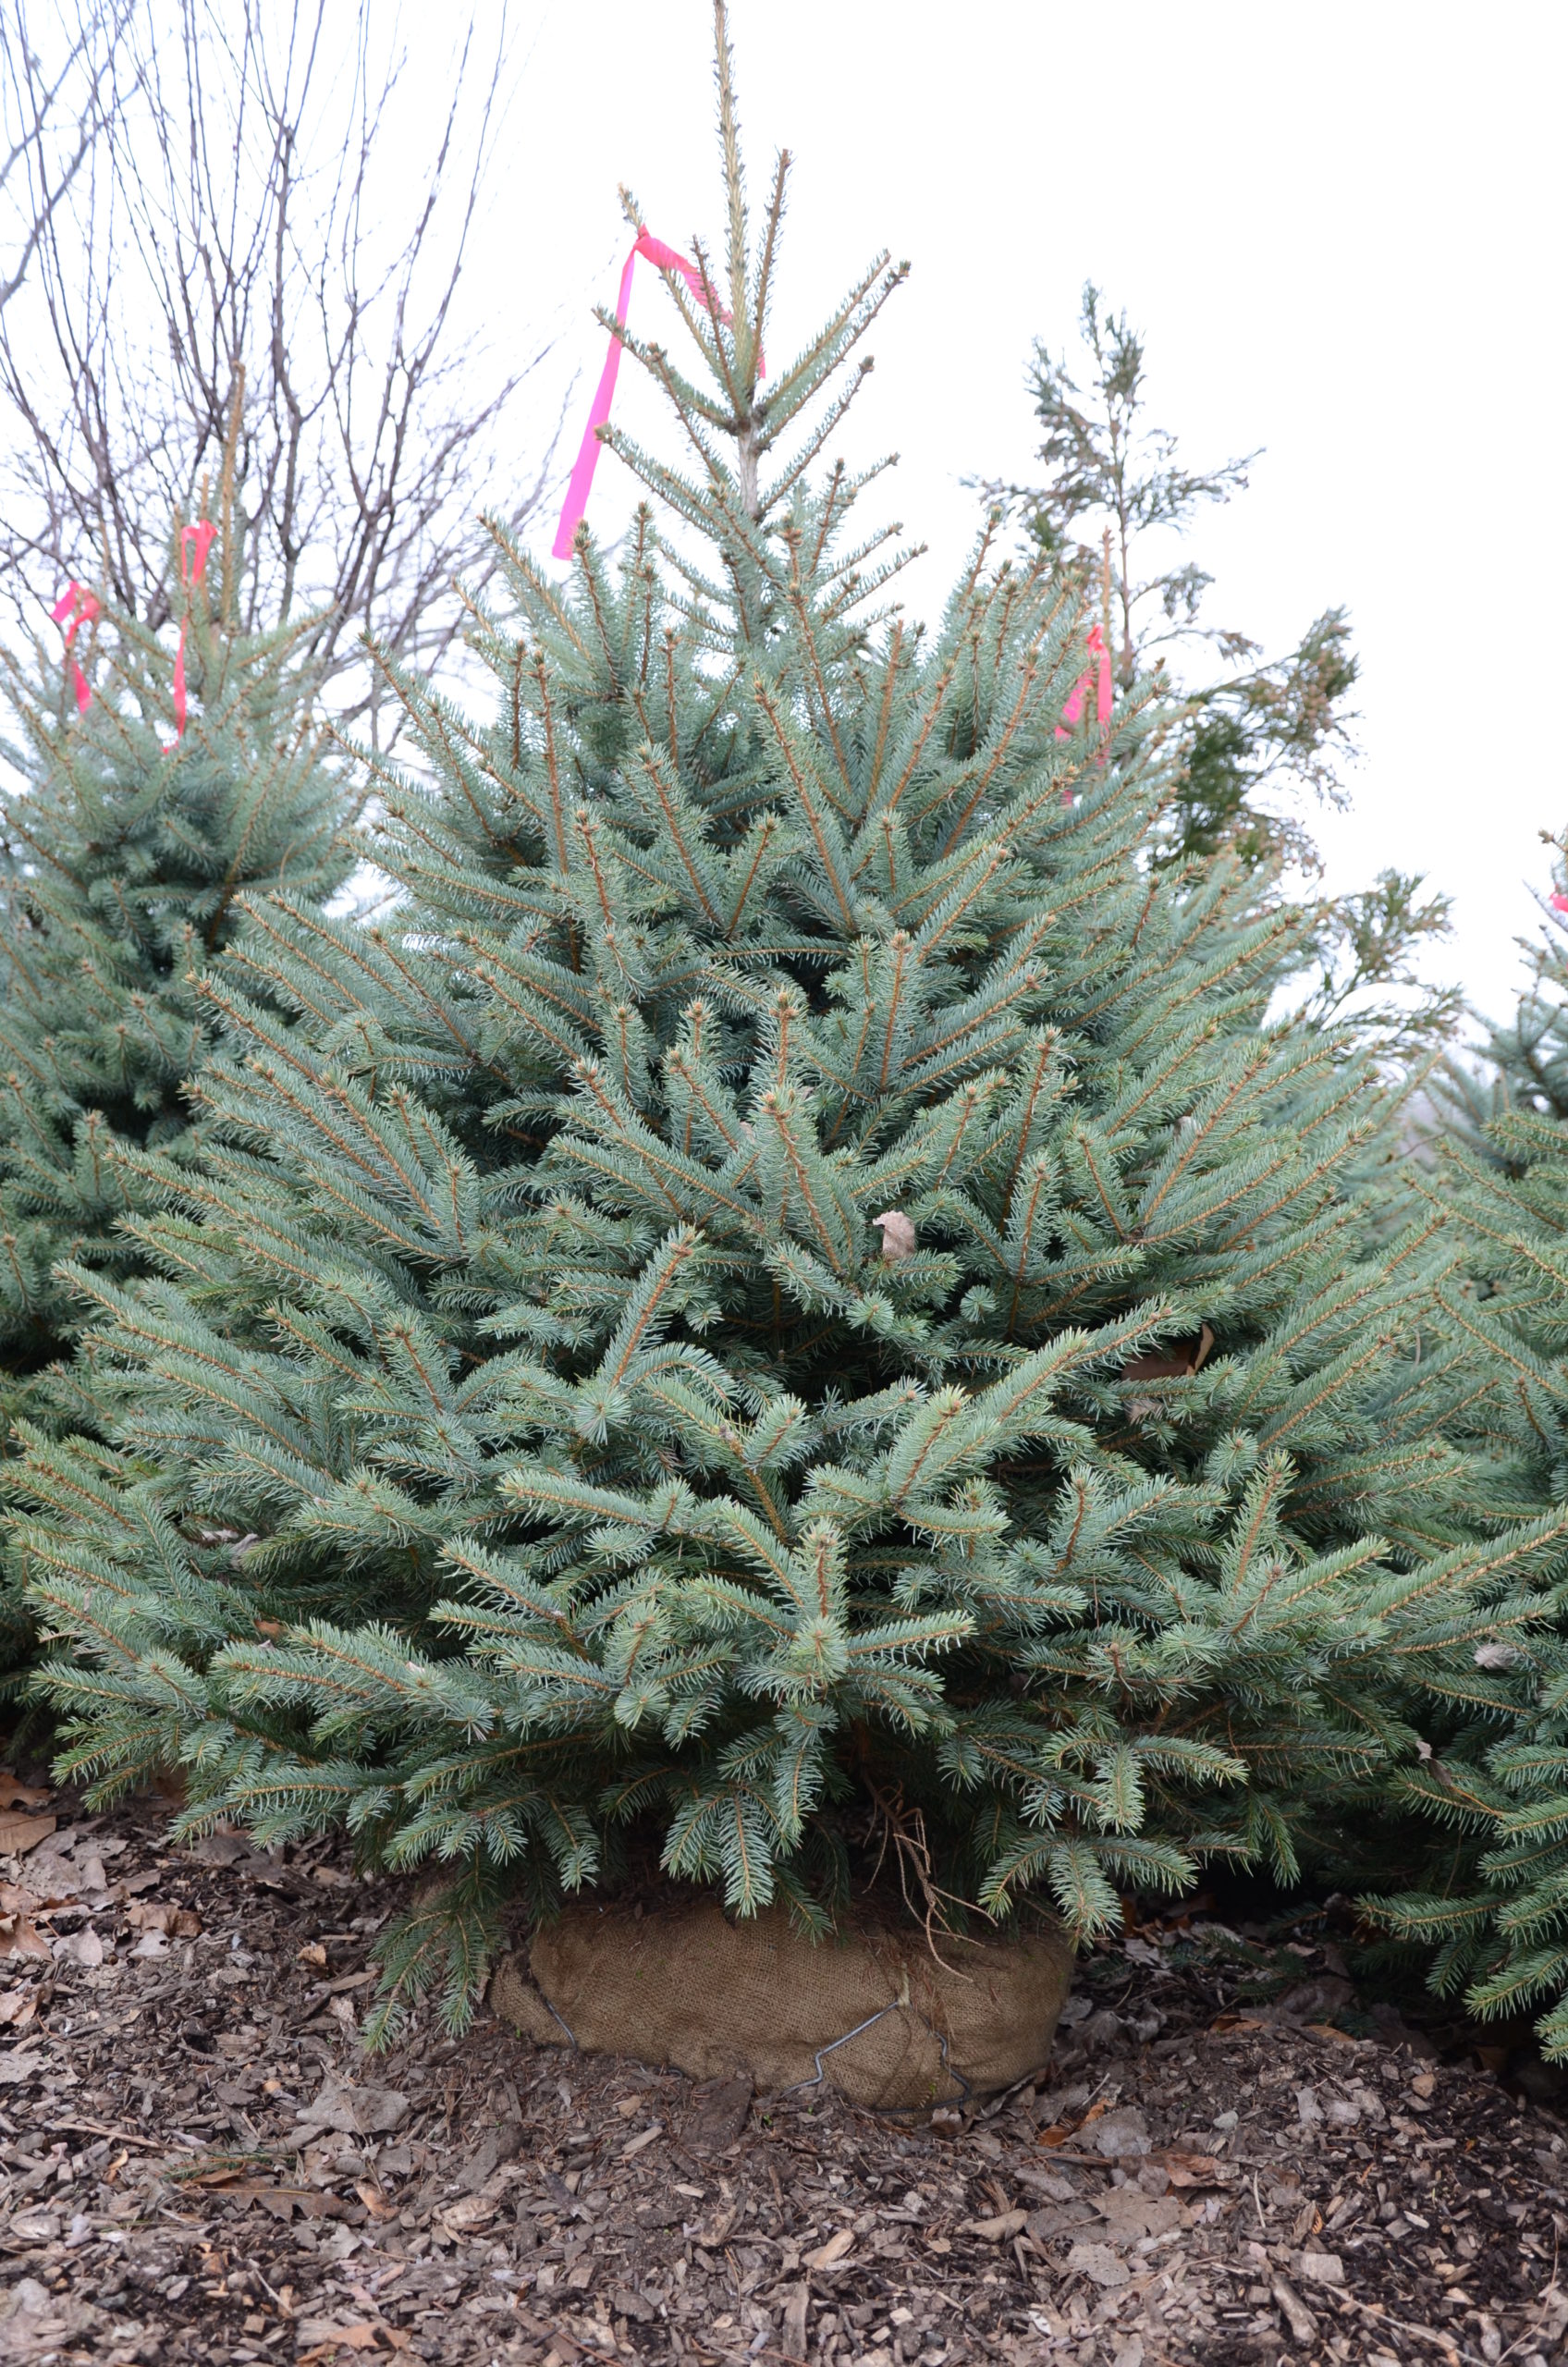 A balled and burlapped (B&B) Christmas tree. These tend to be much larger that the container trees, and it can be a challenge getting them indoors. But after Christmas they get planted outdoors. For some, this is a holiday tradition.